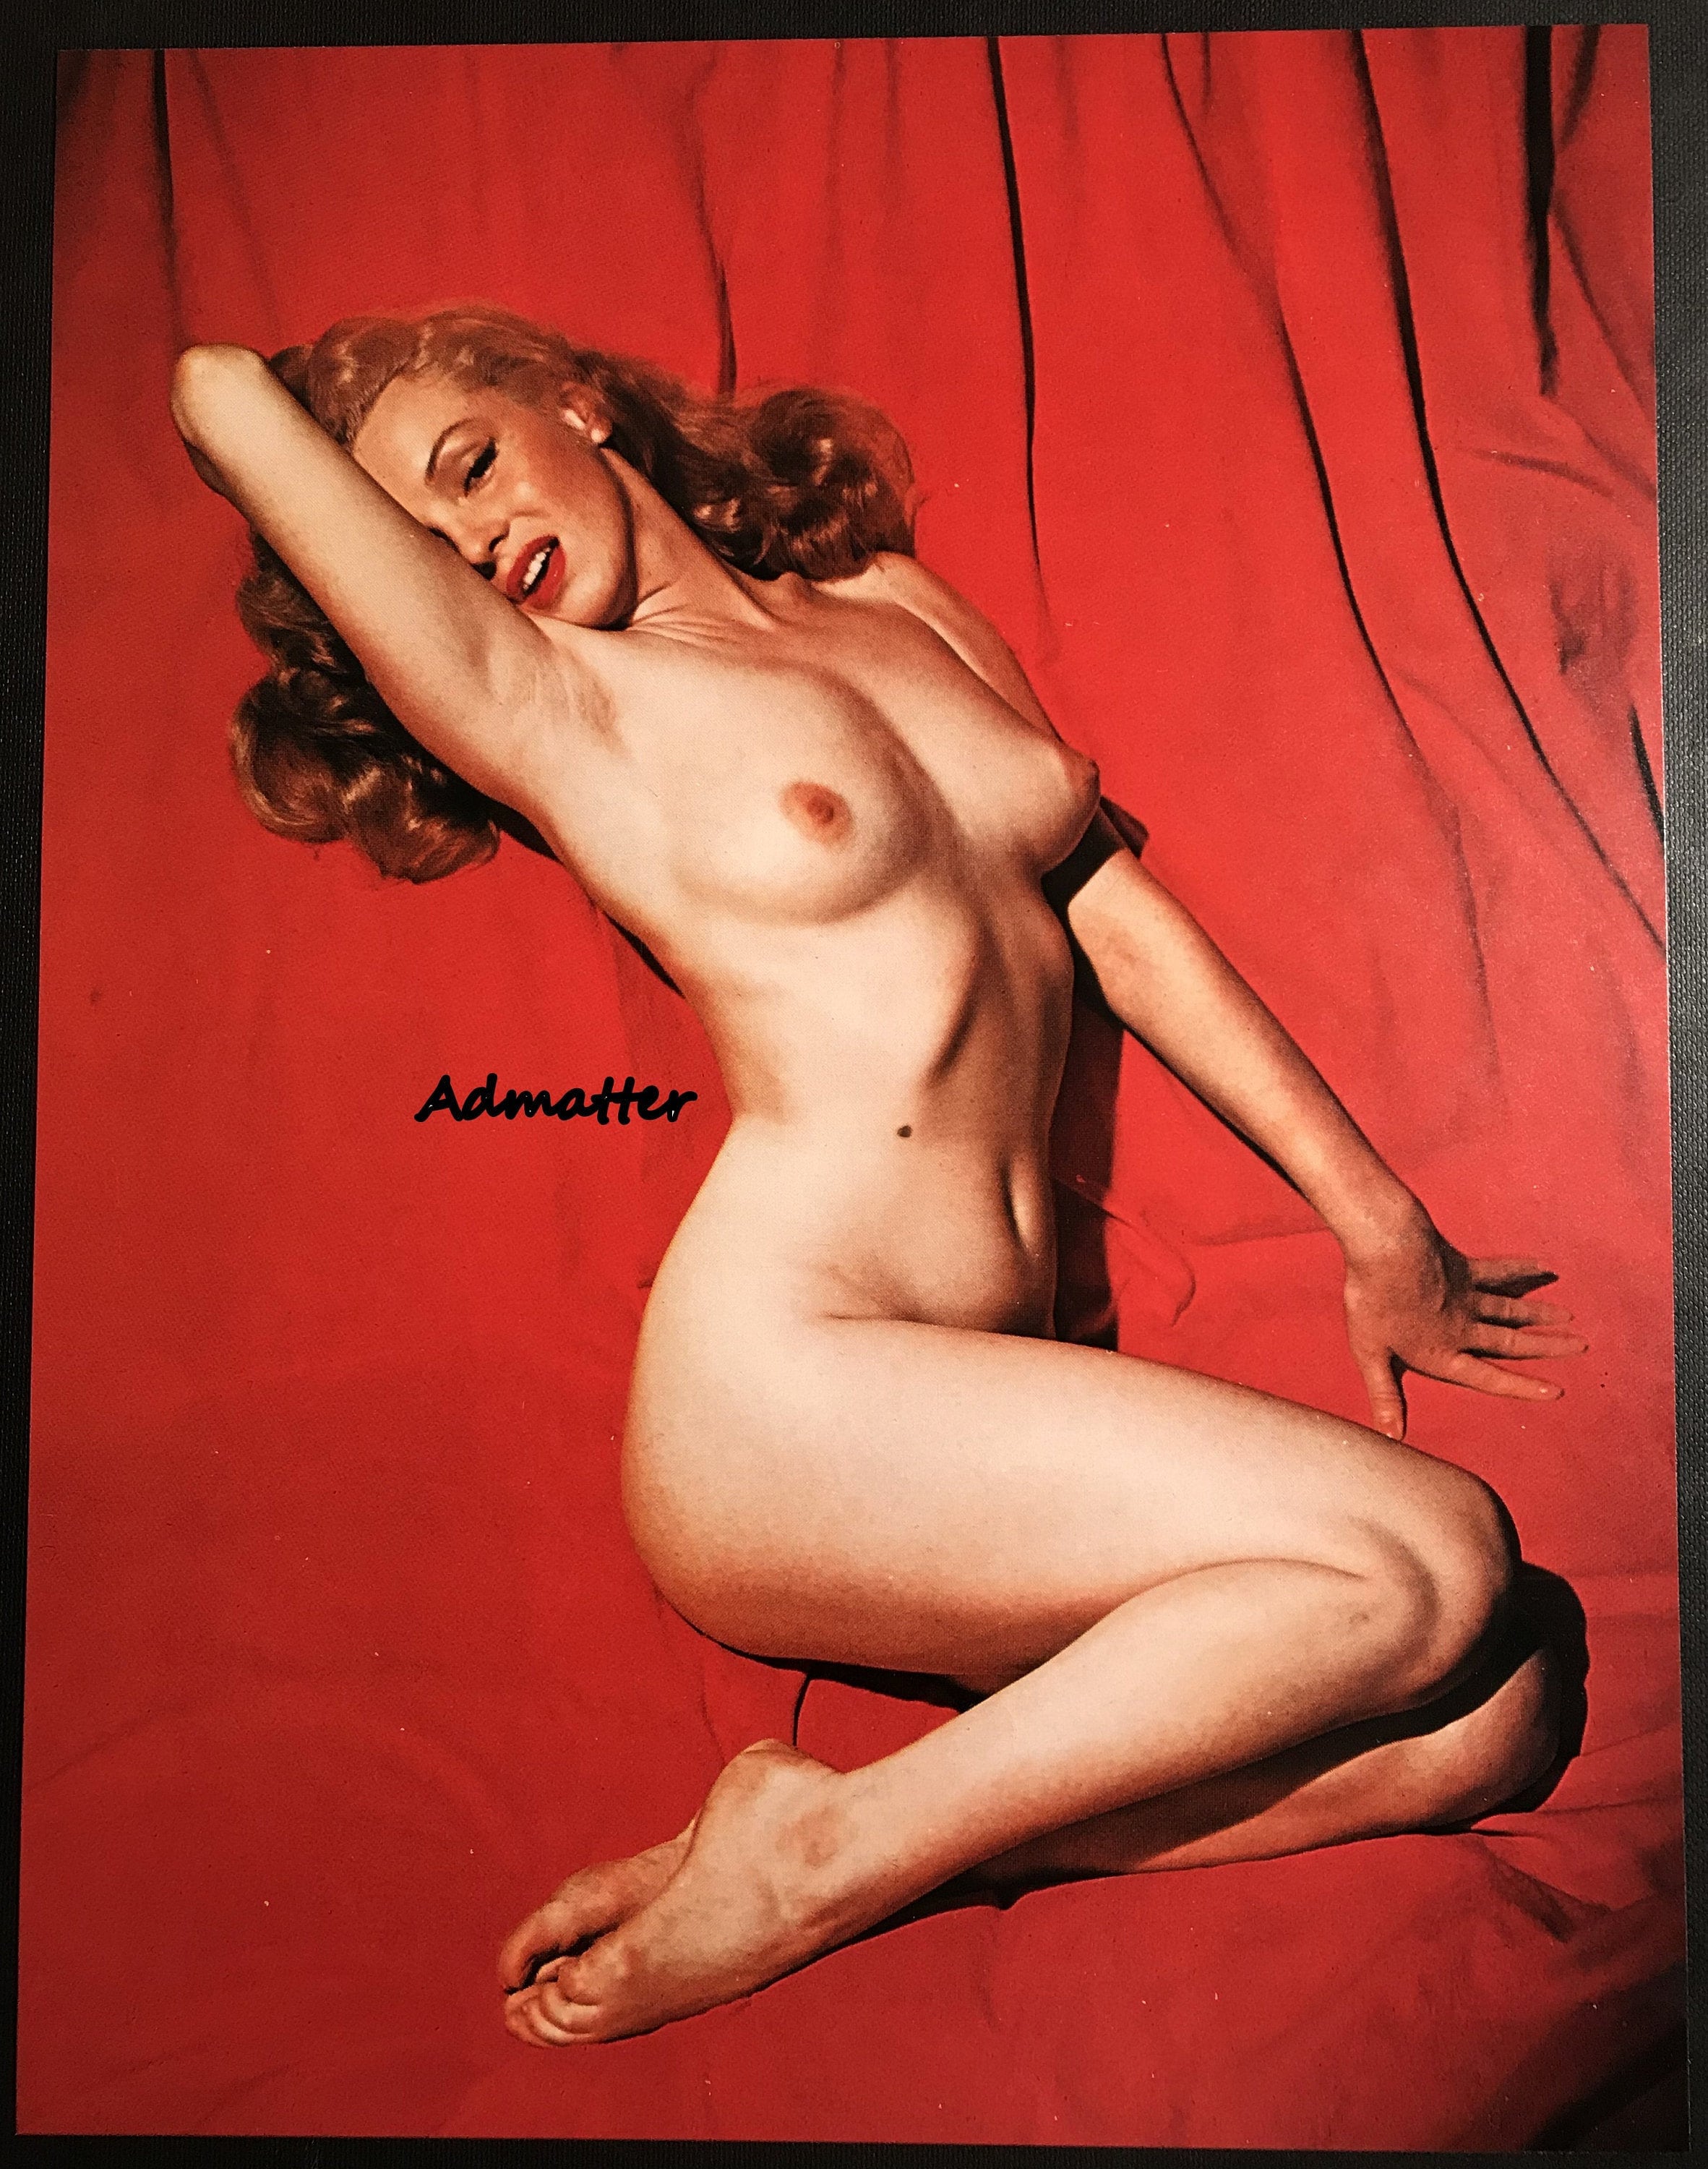 carolyn sherriff recommends marilyn monroe topless pic